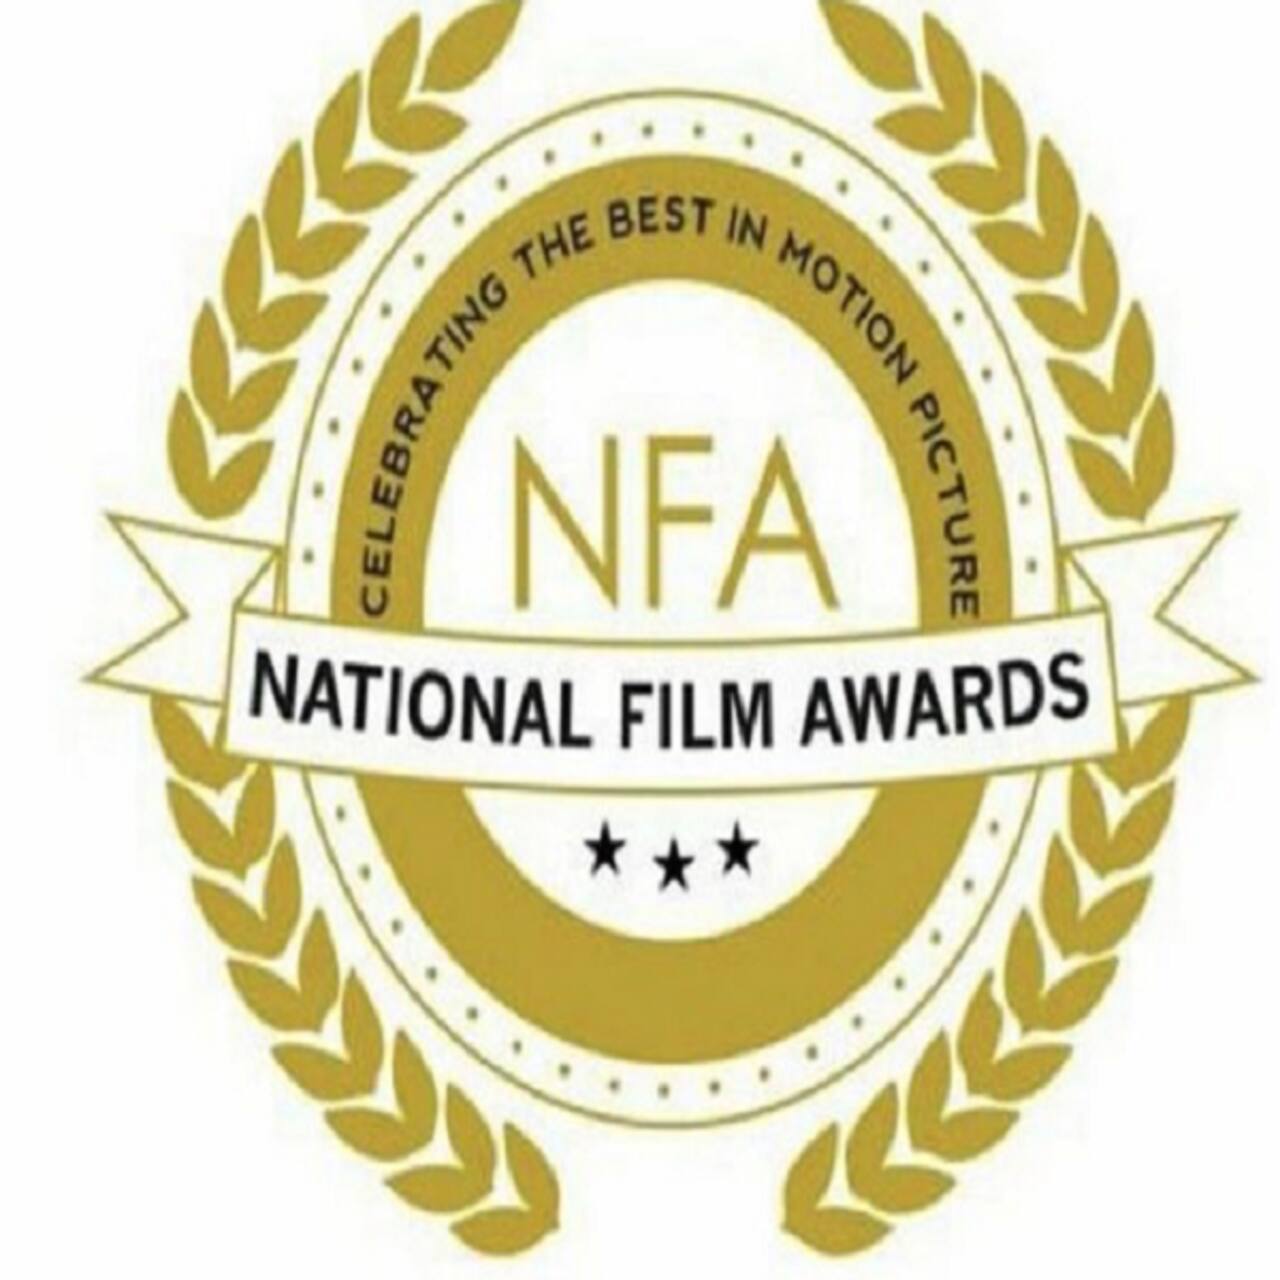 68th National Film Awards: When, where to watch the complete list of winners, past honours and more